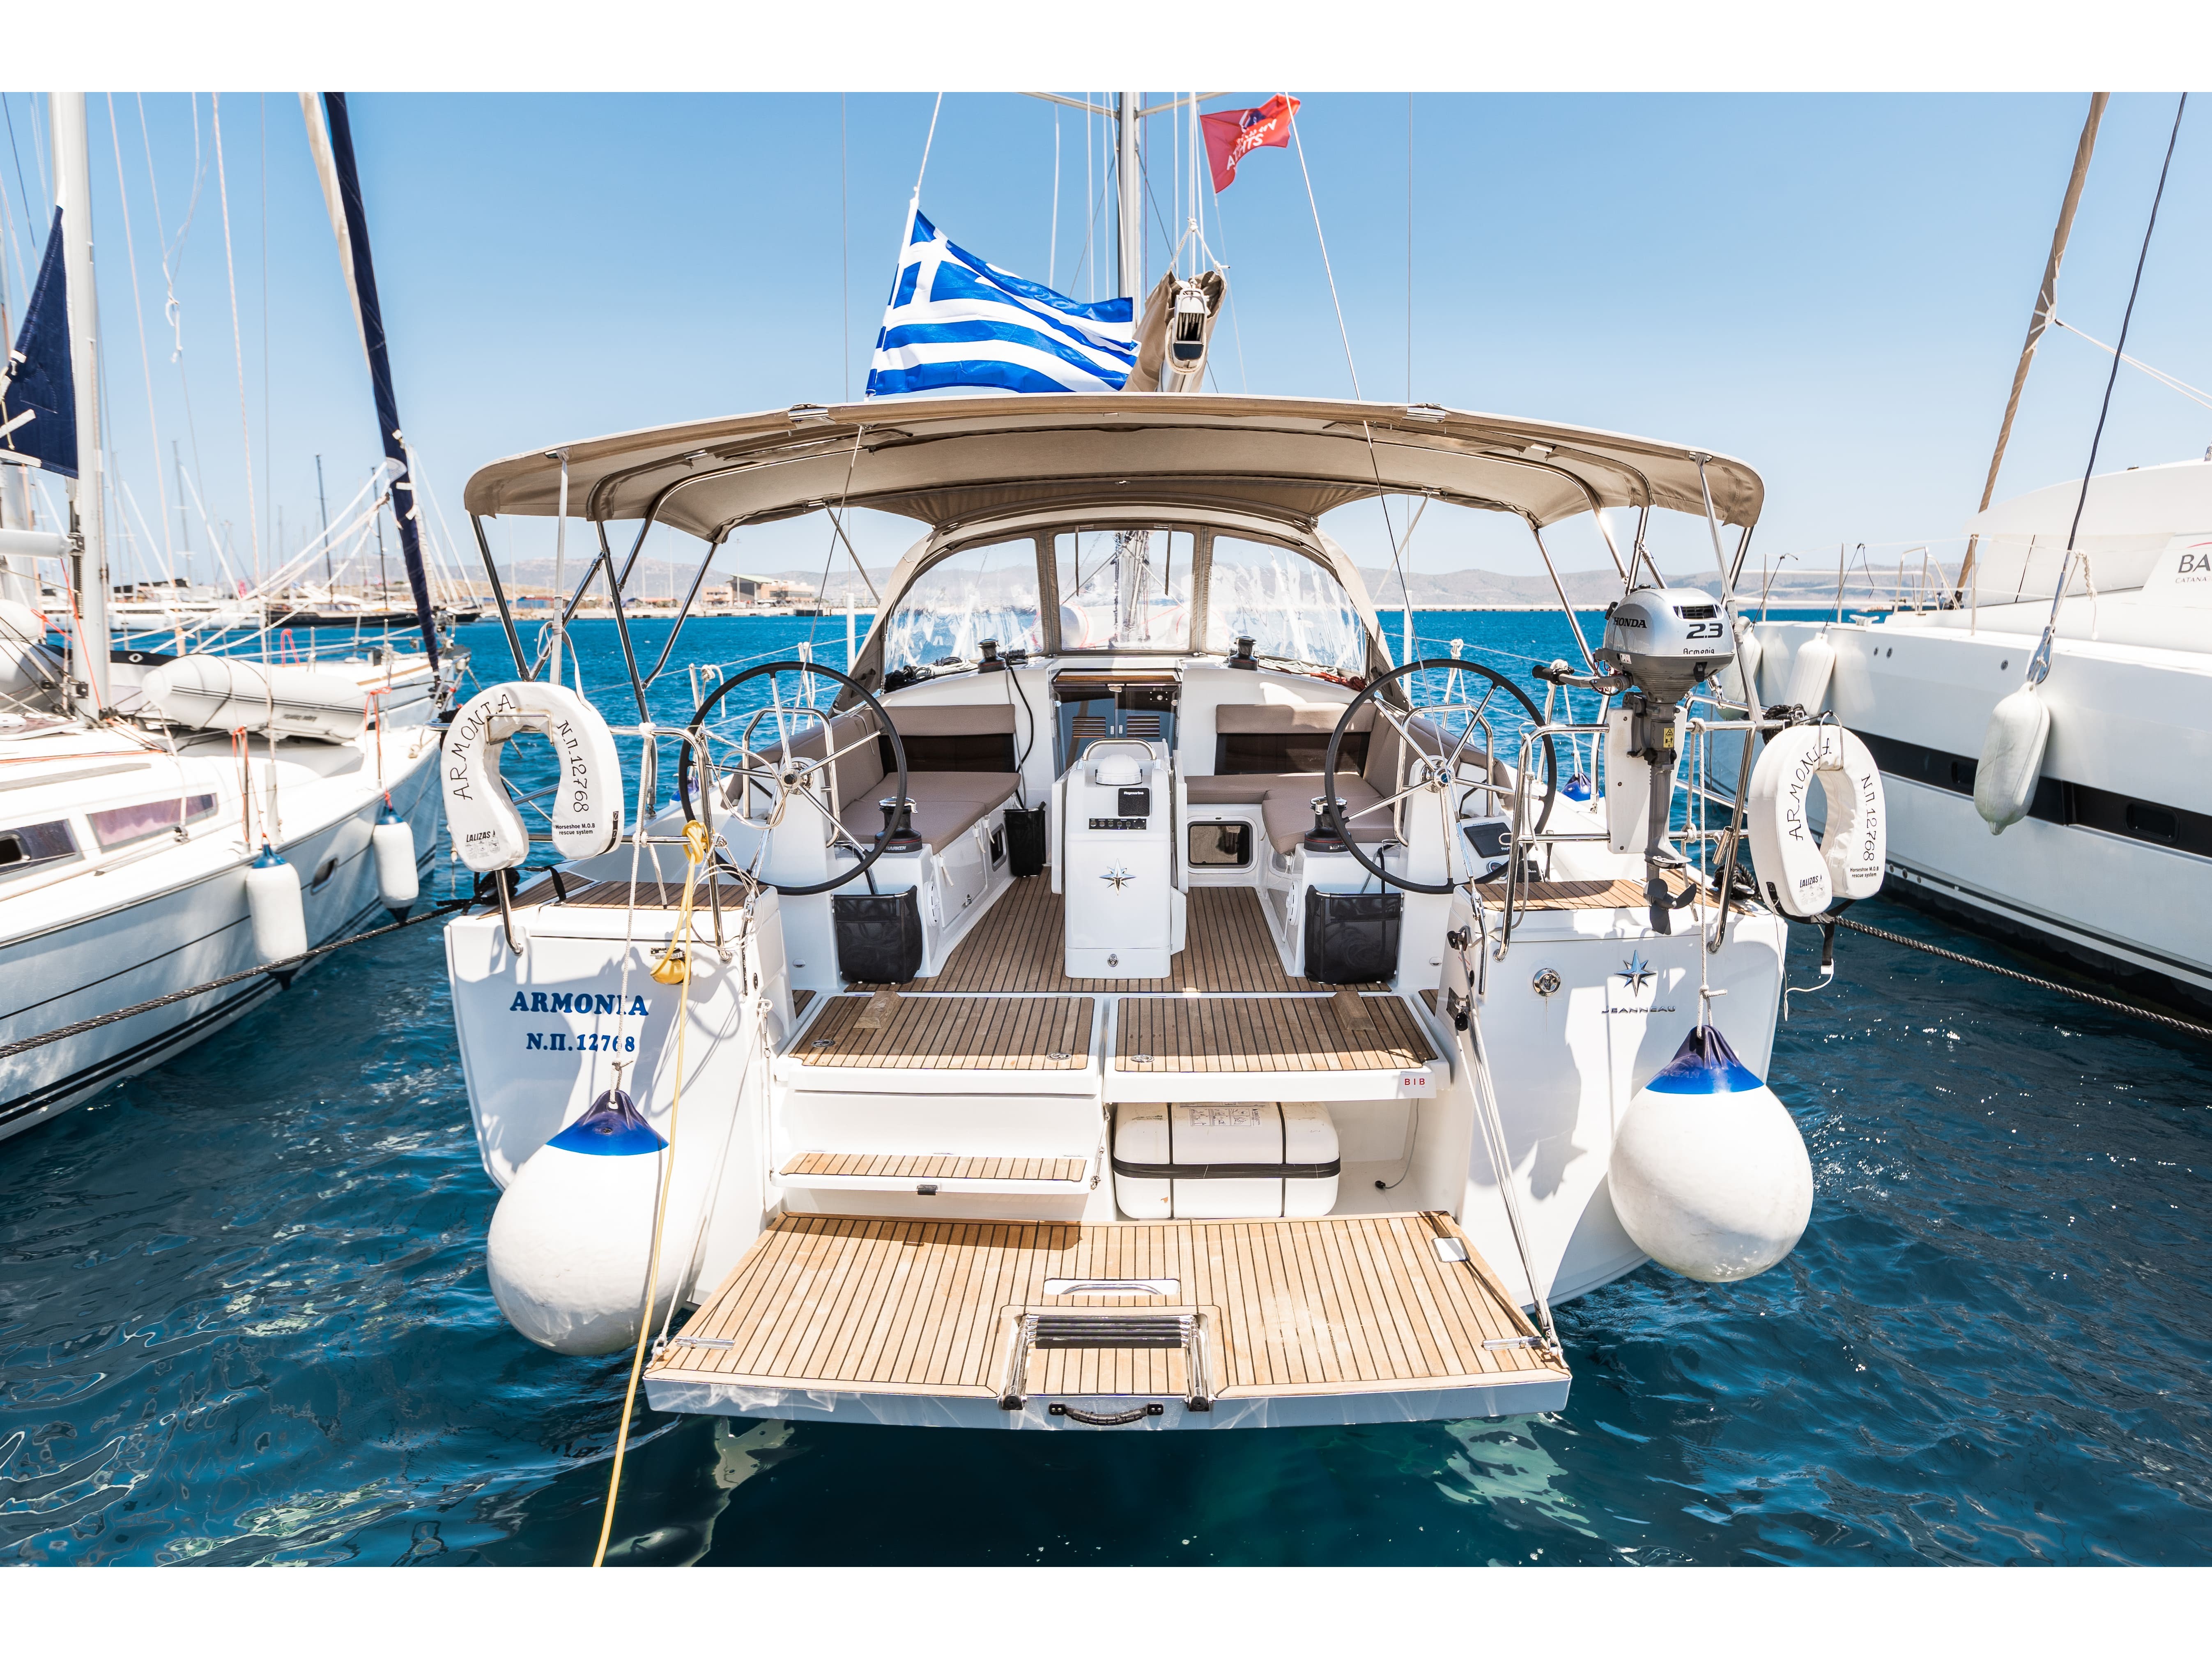 Sun Odyssey 440 - Yacht Charter Lavrion & Boat hire in Greece Athens and Saronic Gulf Lavrion Lavrion Main Port 2